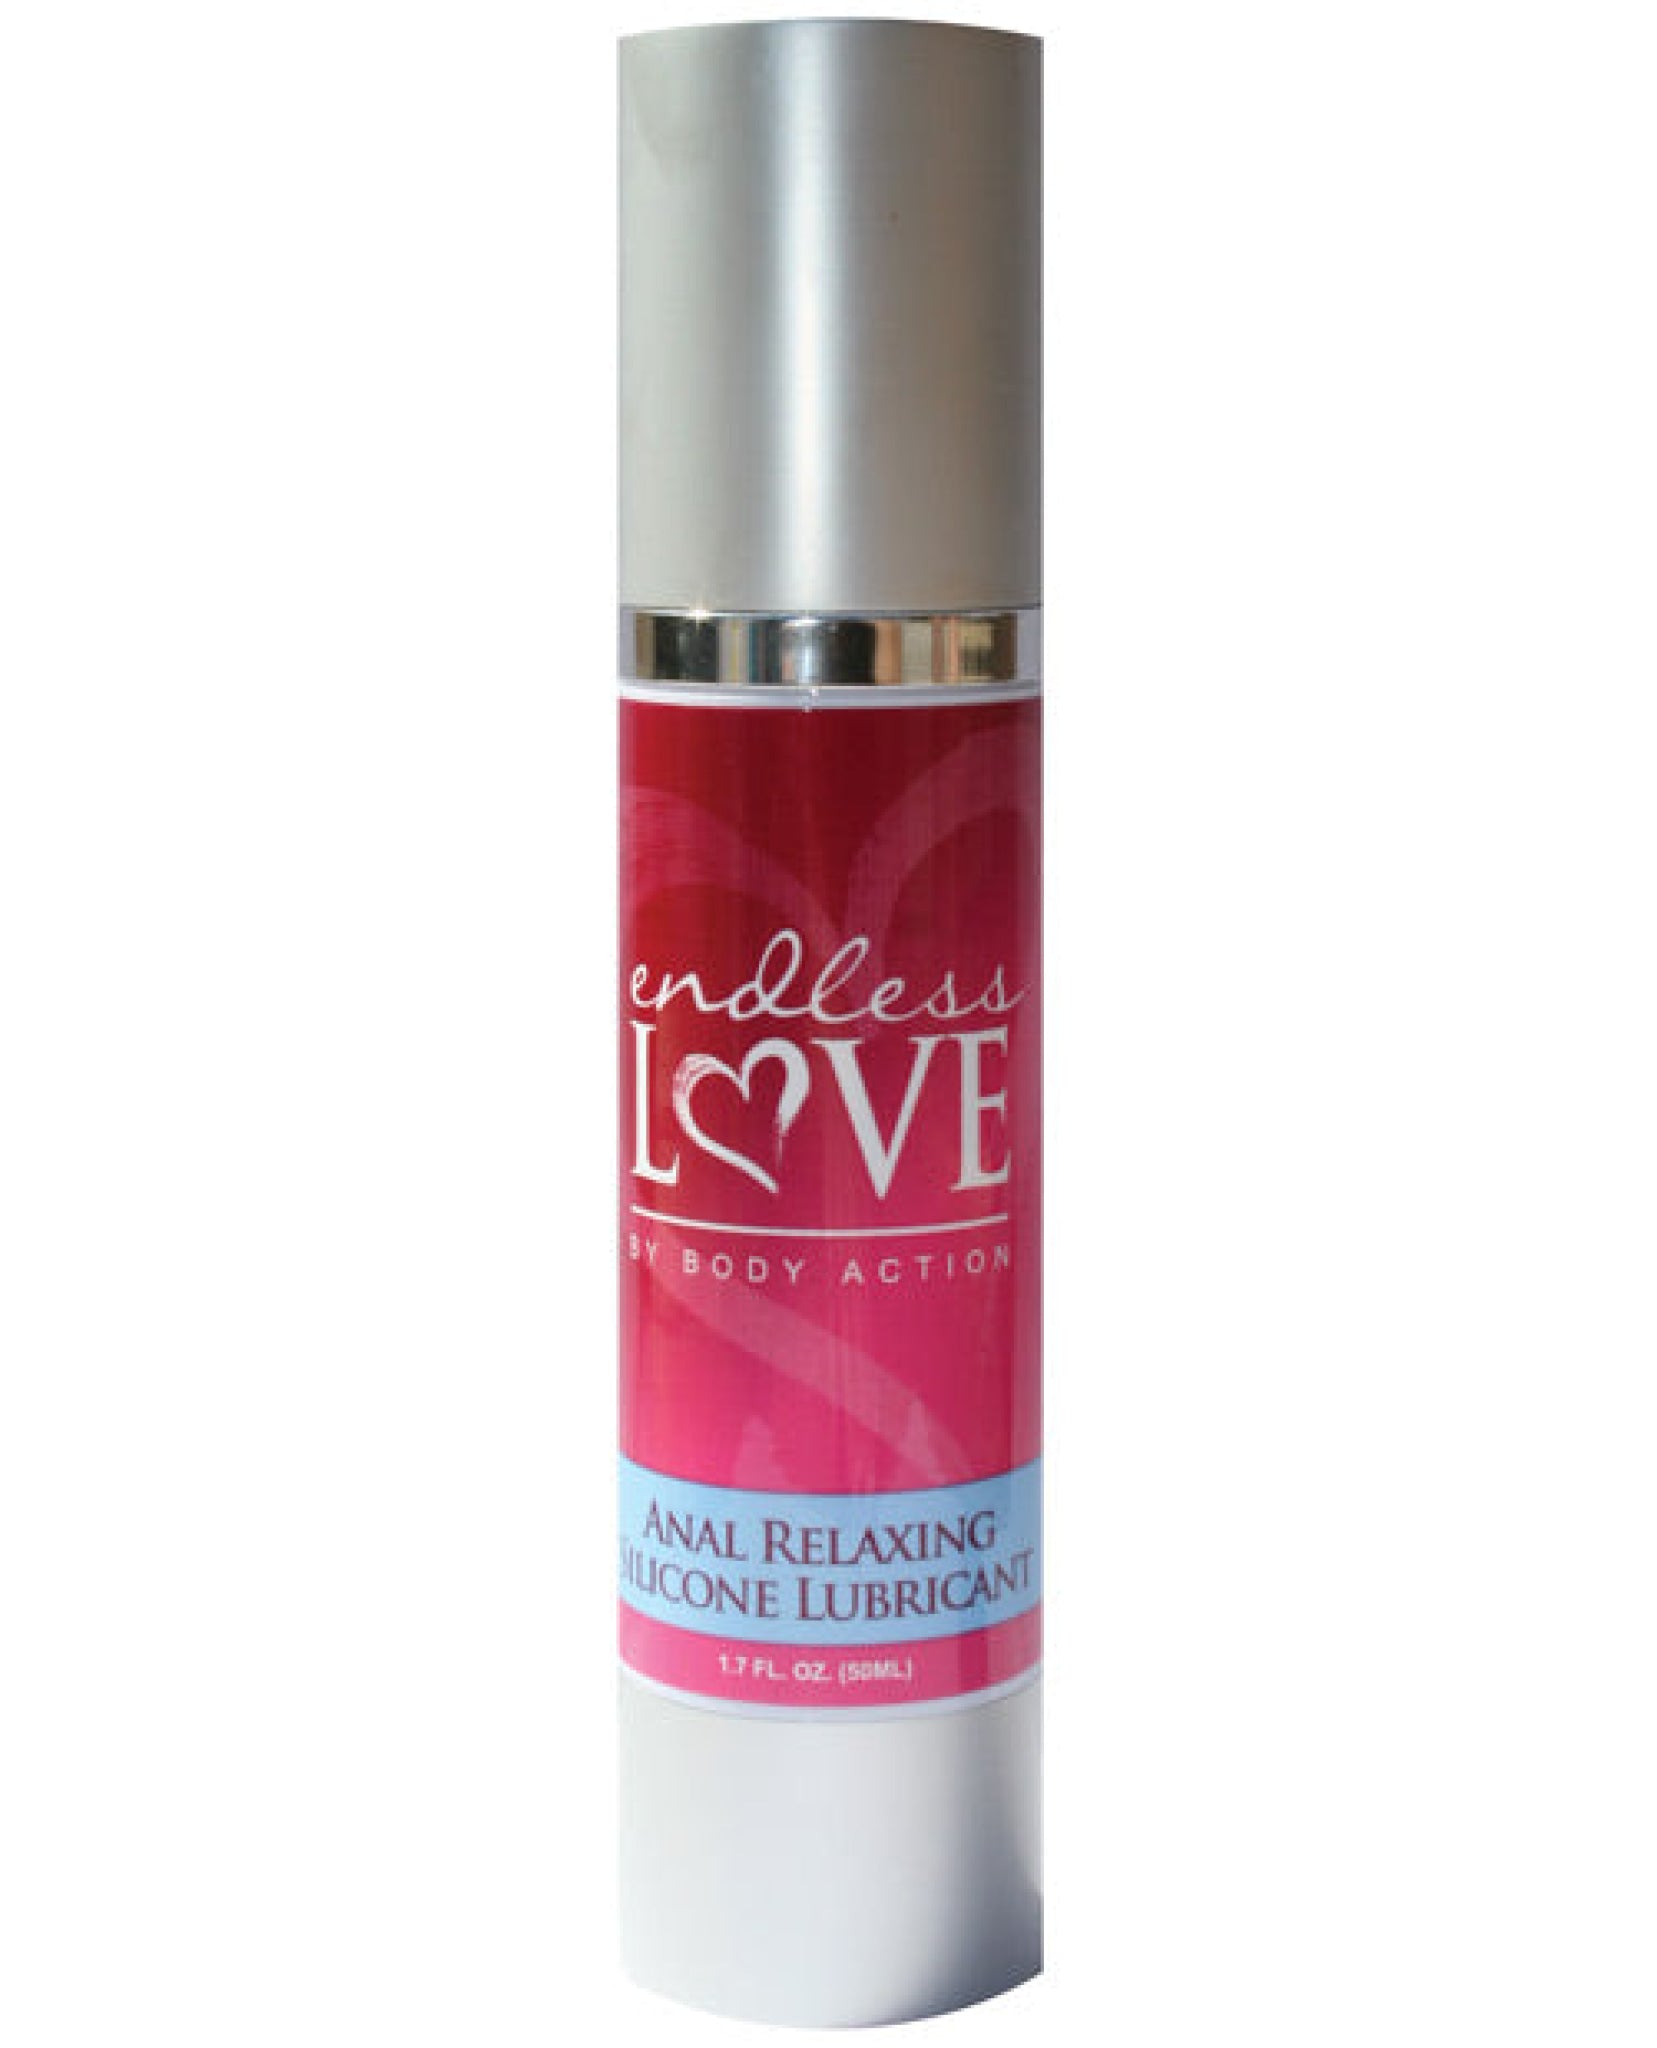 Endless Love Relaxing Anal Silicone Lubricant - 1.7 Oz Body Action